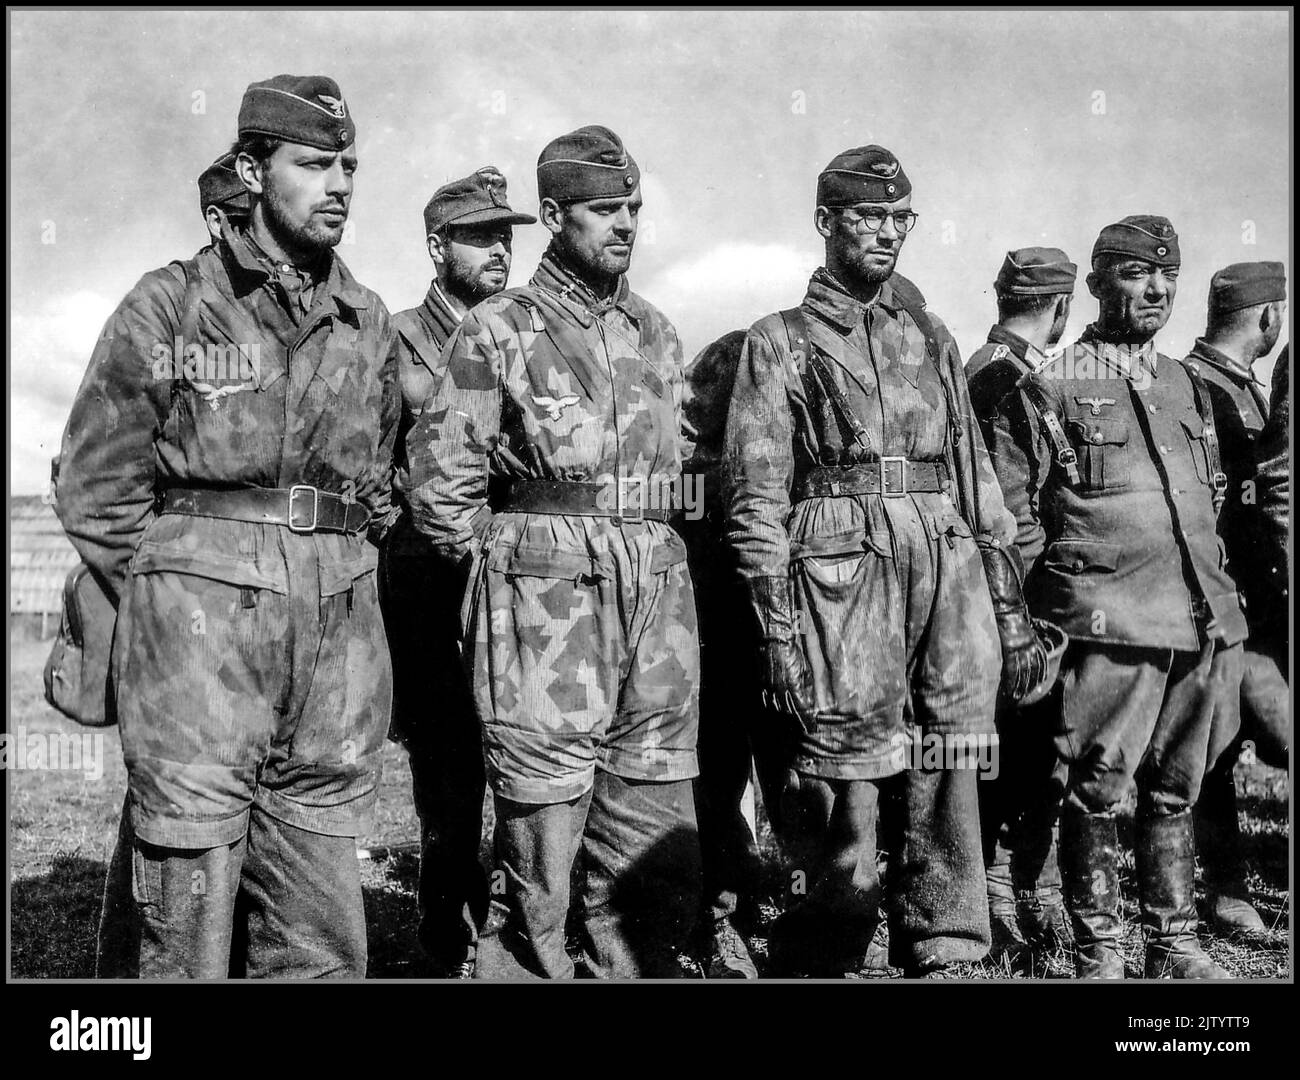 WW2 Normandy D-Day Nazi Germany POW's Captured Nazi Military Prisoners Luftwaffe and Wehrmacht POWs Normandy 1944 France World War II Second World War WW2 Northern France 1944 Stock Photo